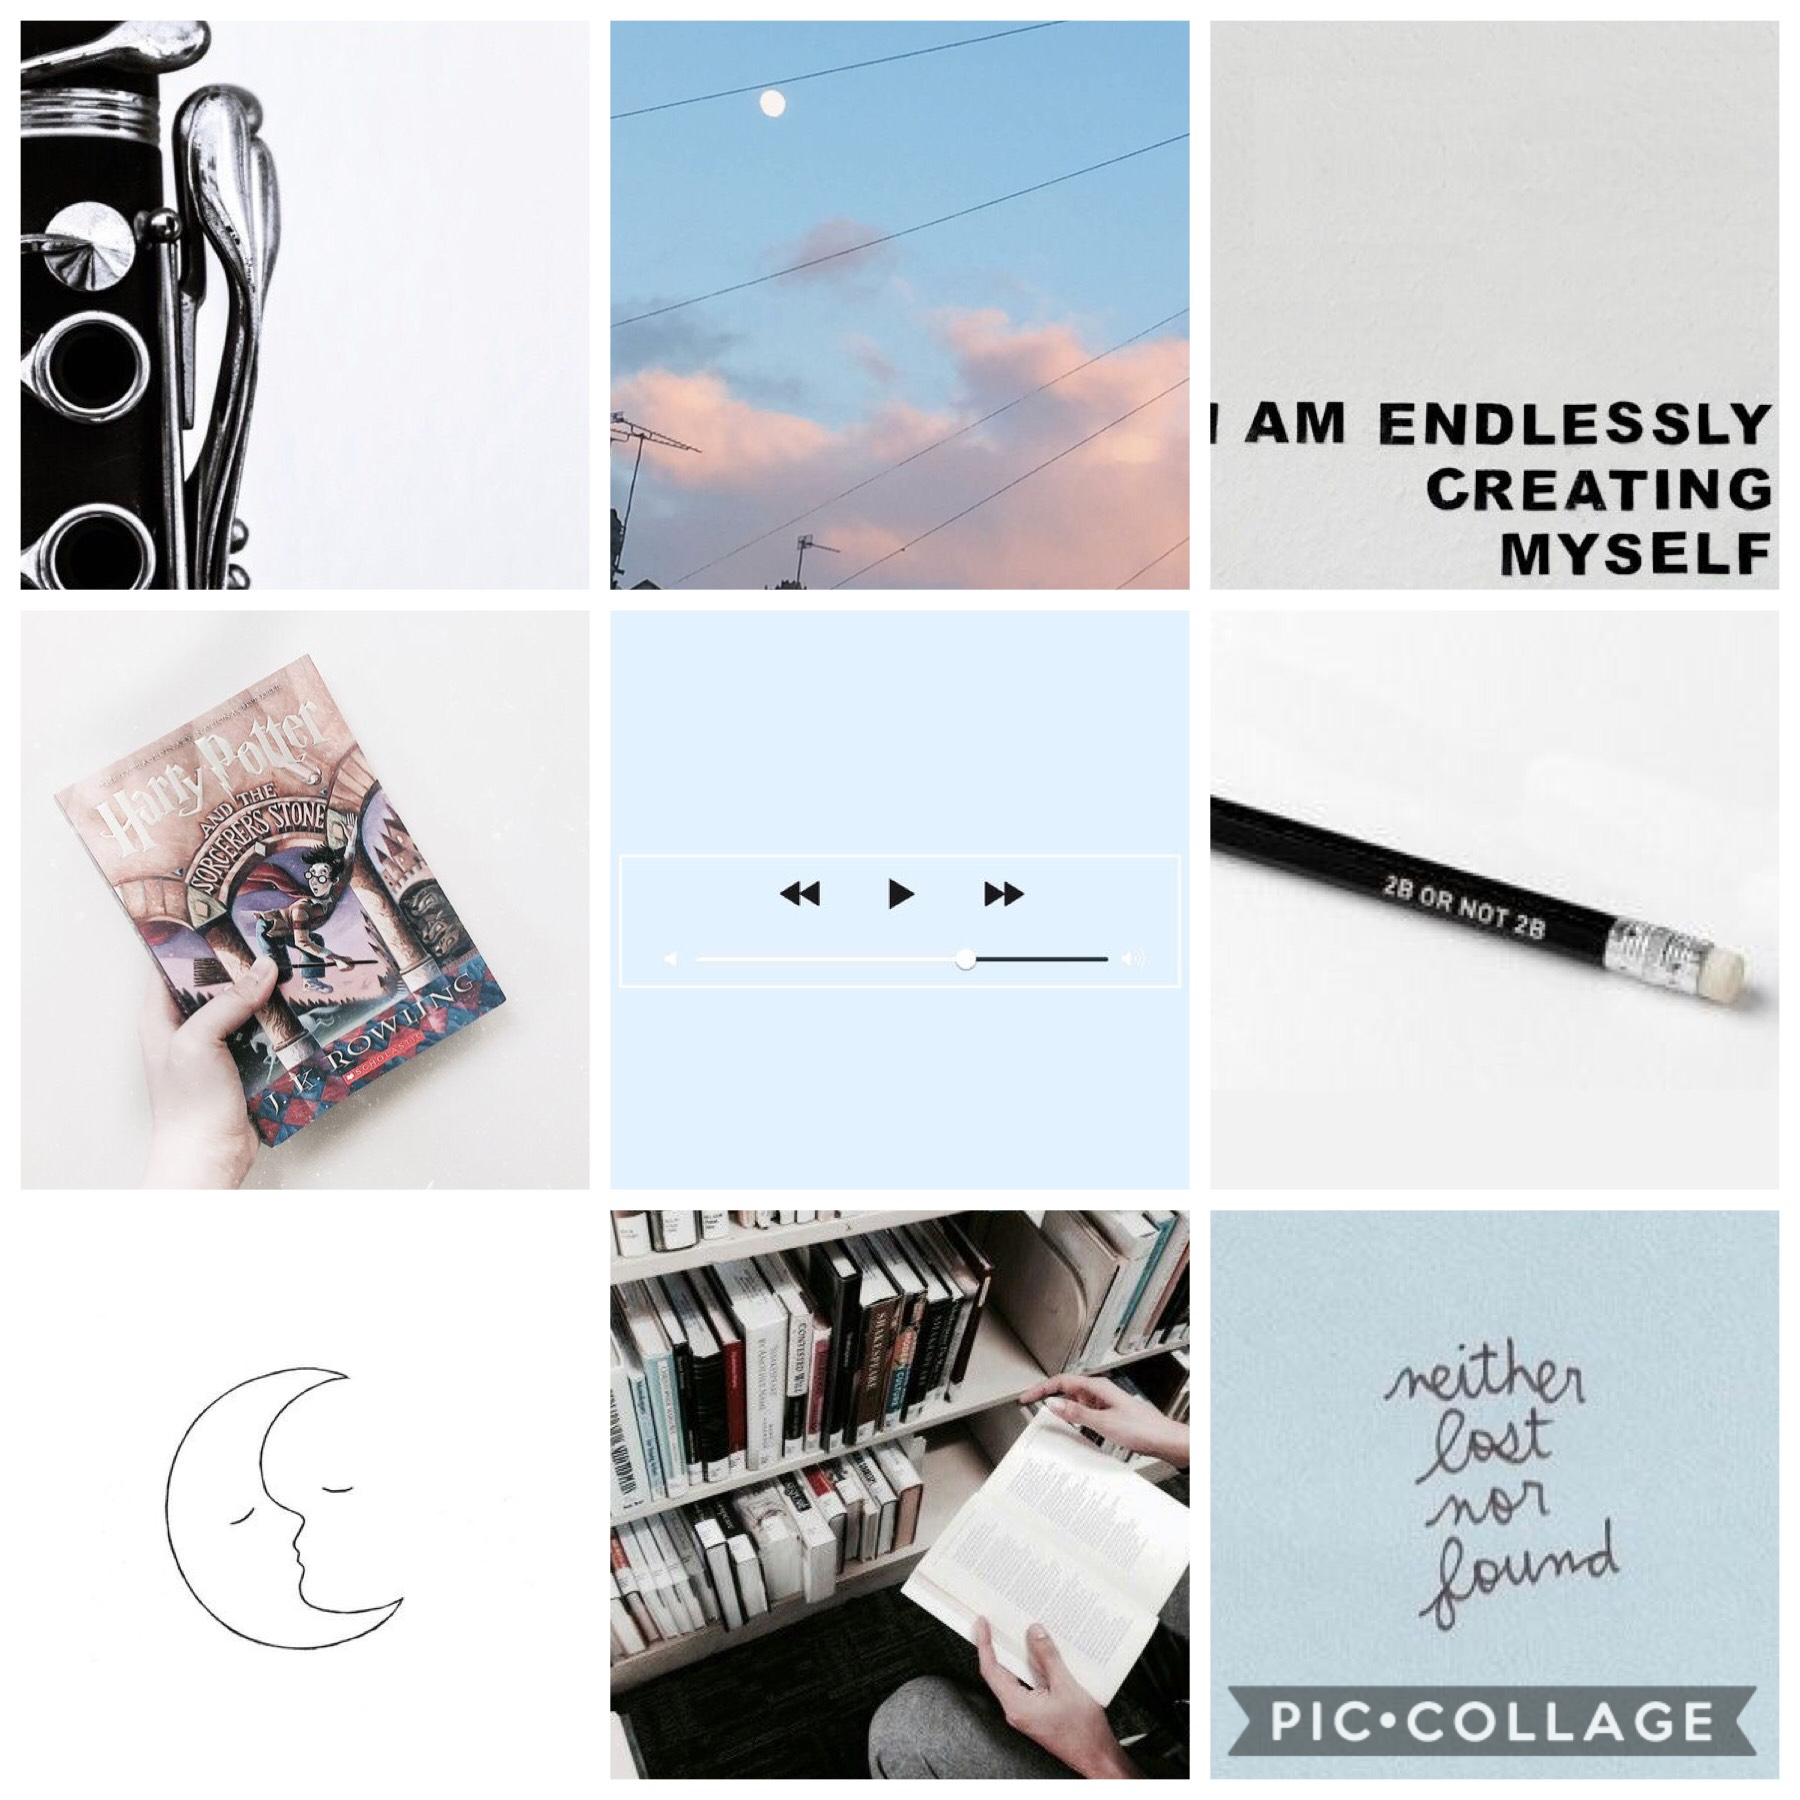 //vibes//
eyy it’s a moodboard i made for myself

12/27/18